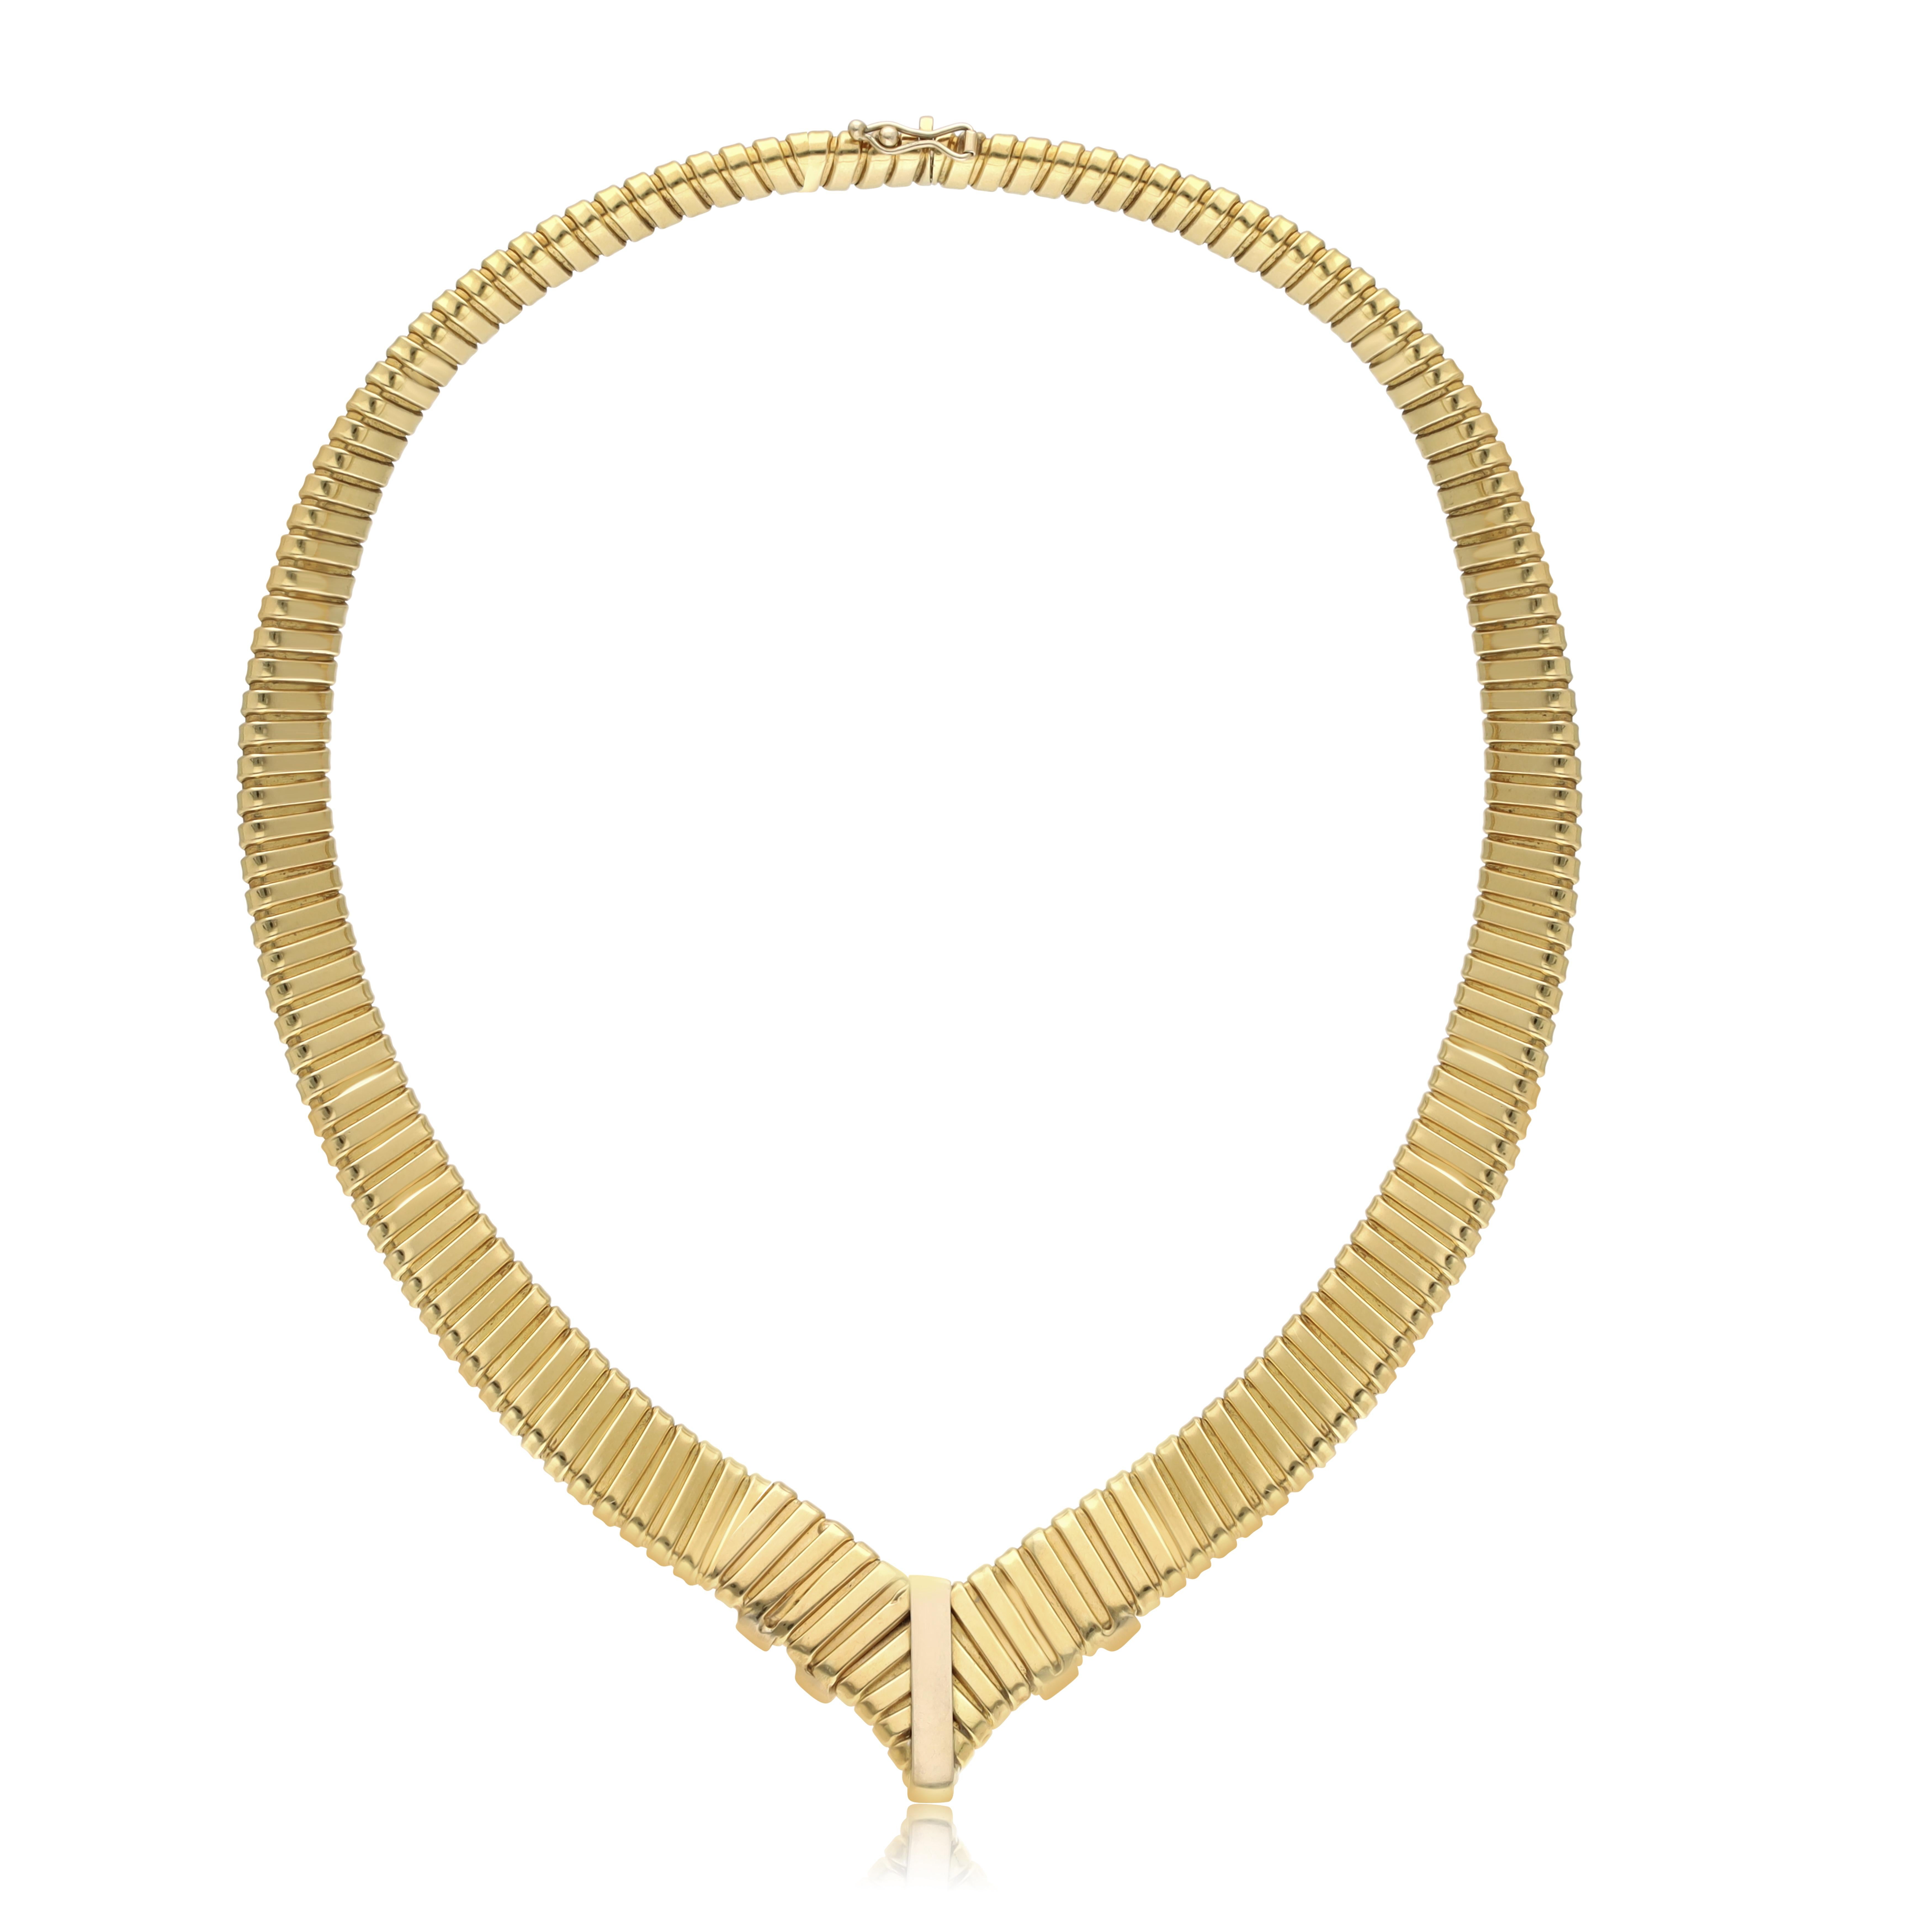 This timeless piece is a luxurious statement of refined elegance. Crafted from 18k gold in the distinct tubogas style of the 1970's, the necklace is adorned with a crowning glory of 1.1 carats of dazzling diamonds. Enhance any look with this